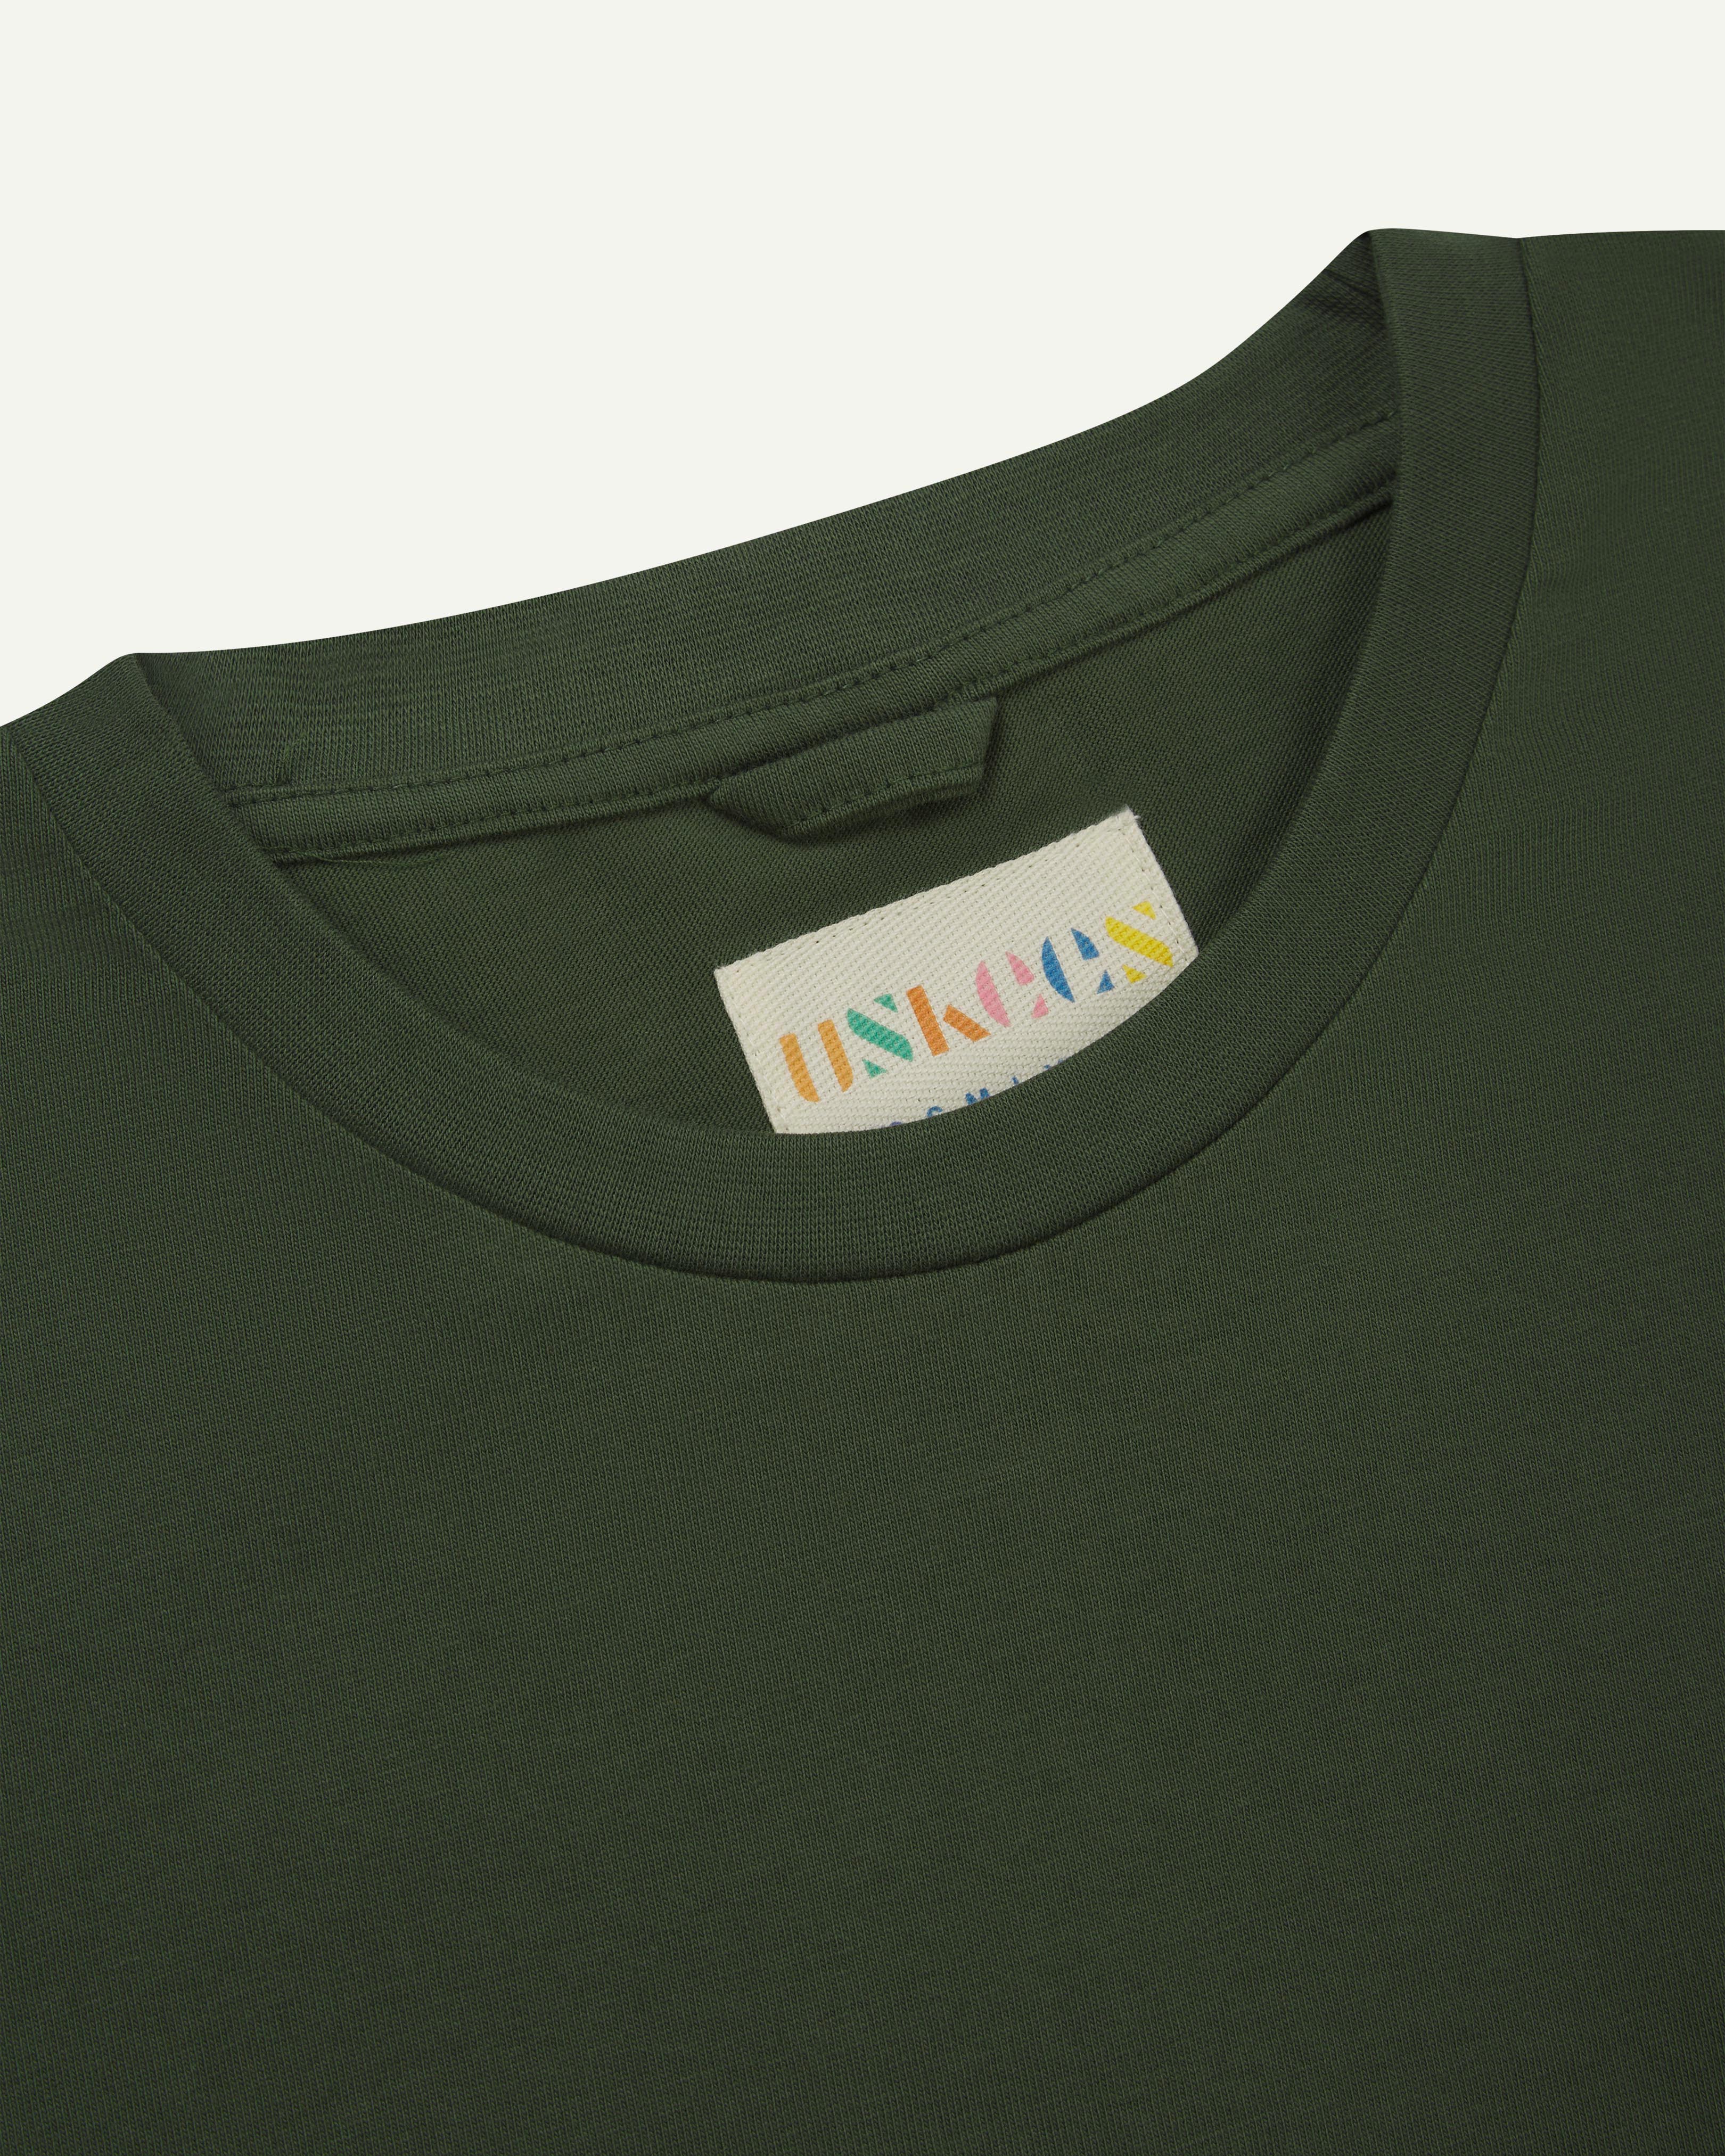 Close-up front shot of Uskees #7010 long sleeve t-shirt in coriander green showing Uskees branded label on inside neck.